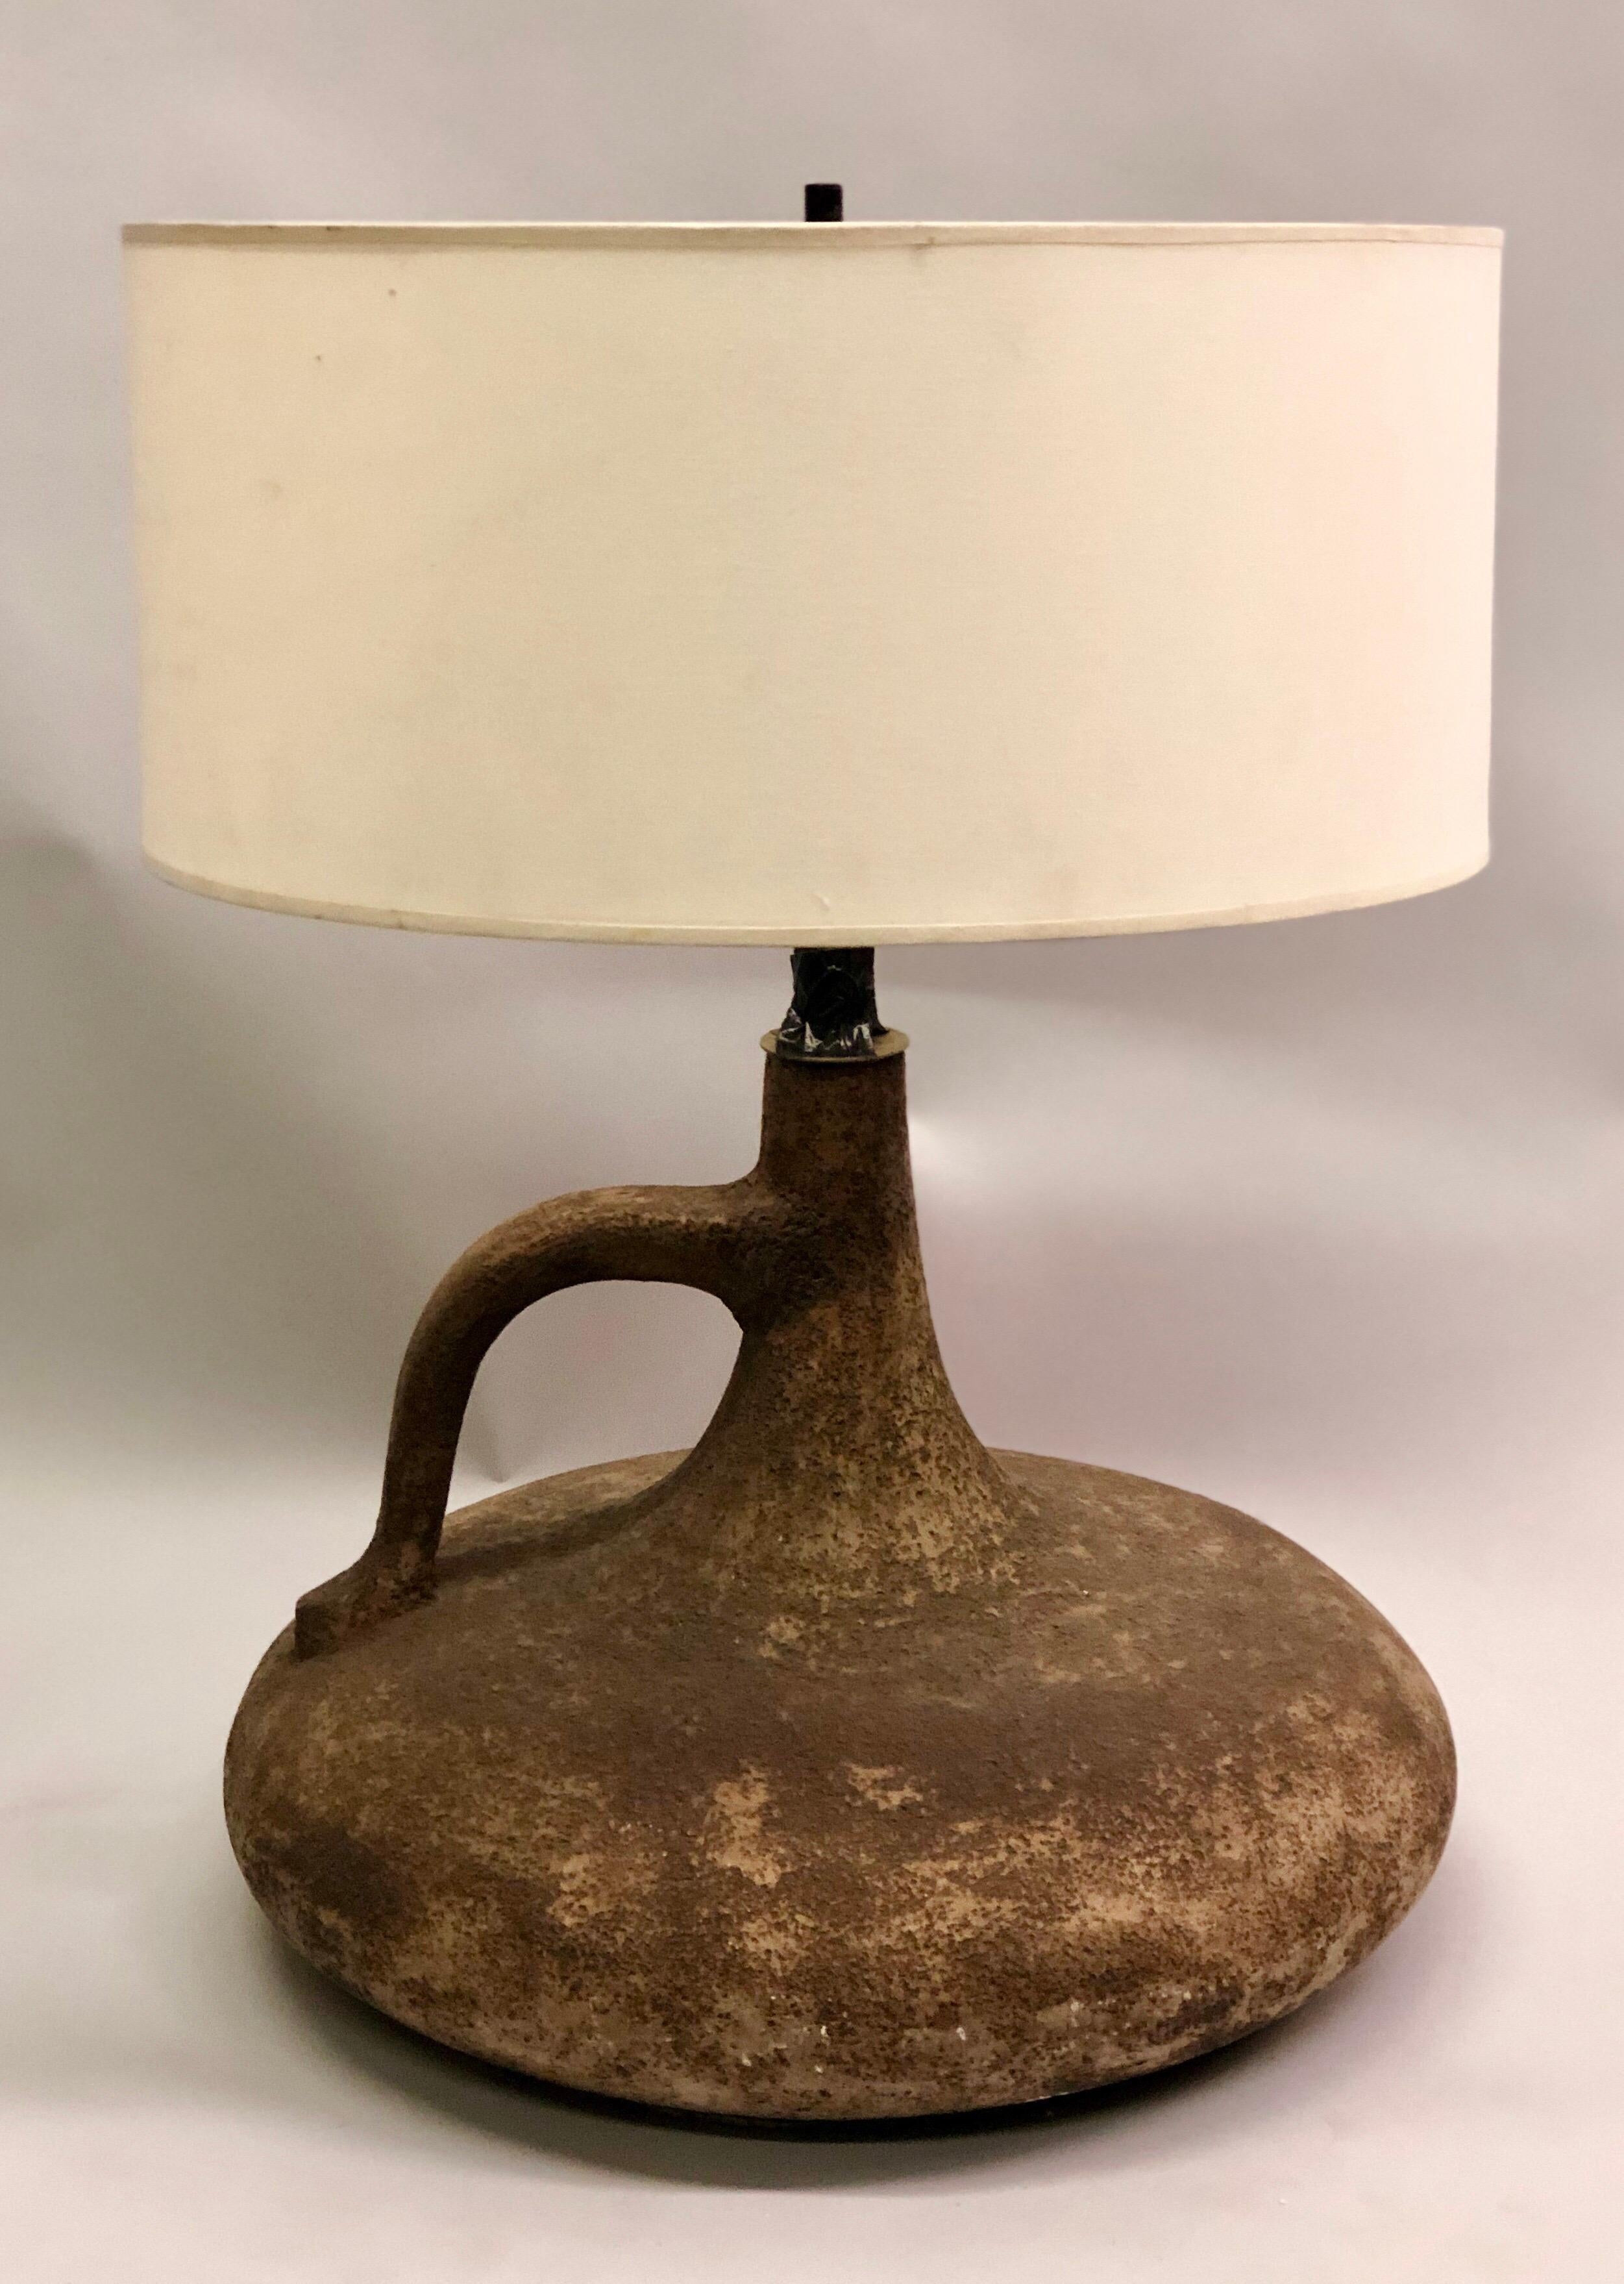 A large, artist handmade, French midcentury urn form ceramic table lamp in the Brutalist tradition emphasizing the raw nature of the clay material counterbalanced with a singular exquisite form.

Height to stem is 15